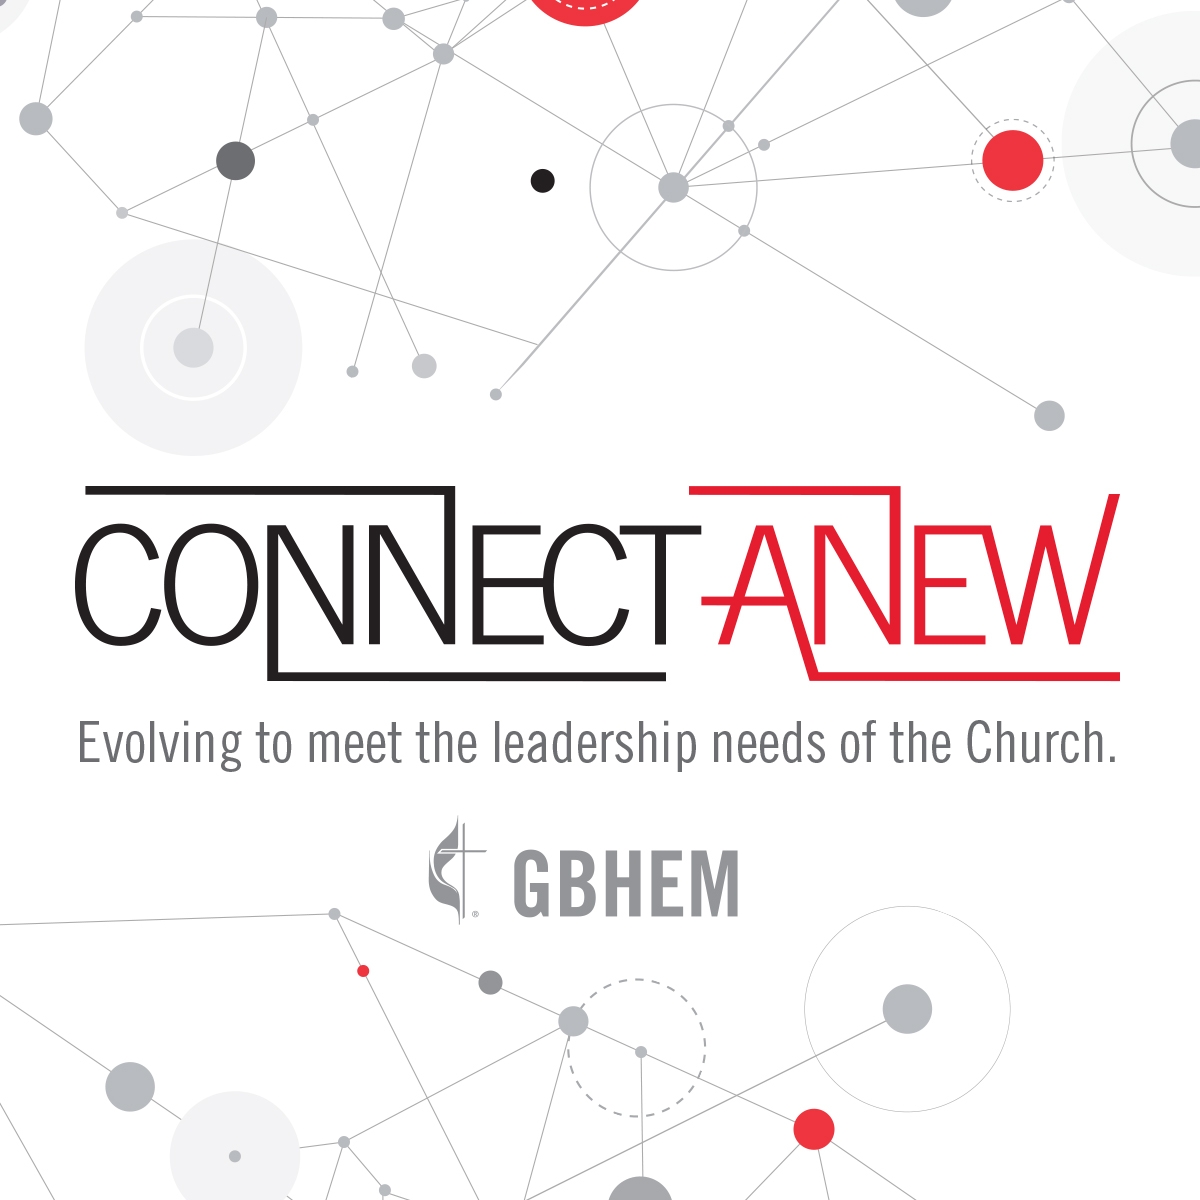 GBHEM Announces CONNECT ANEW: A Strategy to Evolve to Meet the Leadership Needs of the Church